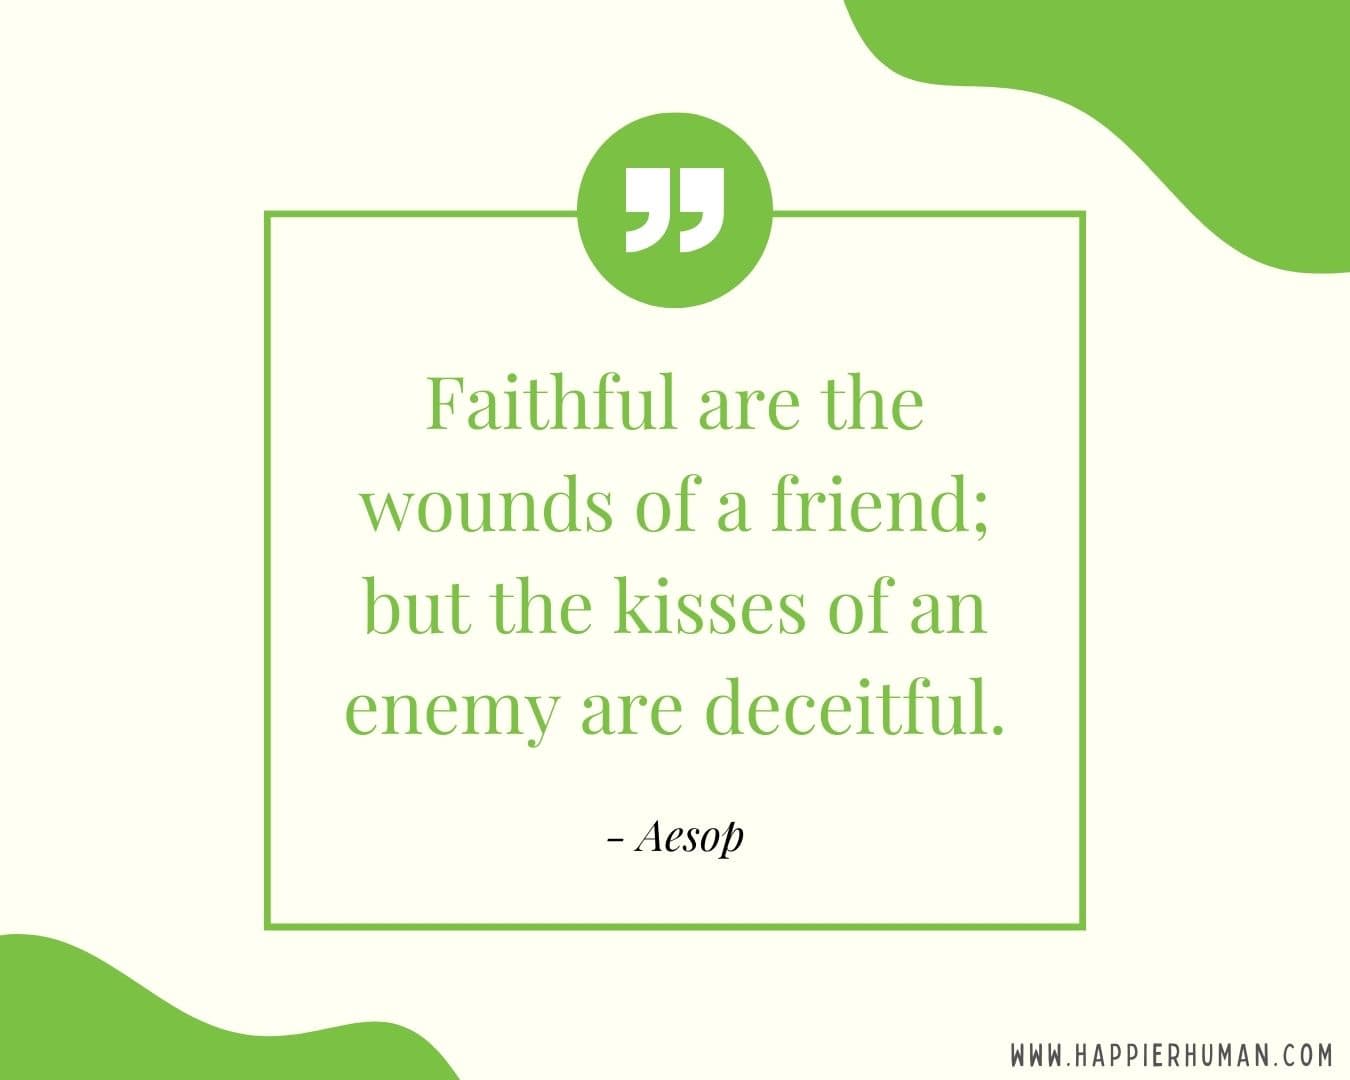 Broken Trust Quotes - “Faithful are the wounds of a friend; but the kisses of an enemy are deceitful.” - Aesop